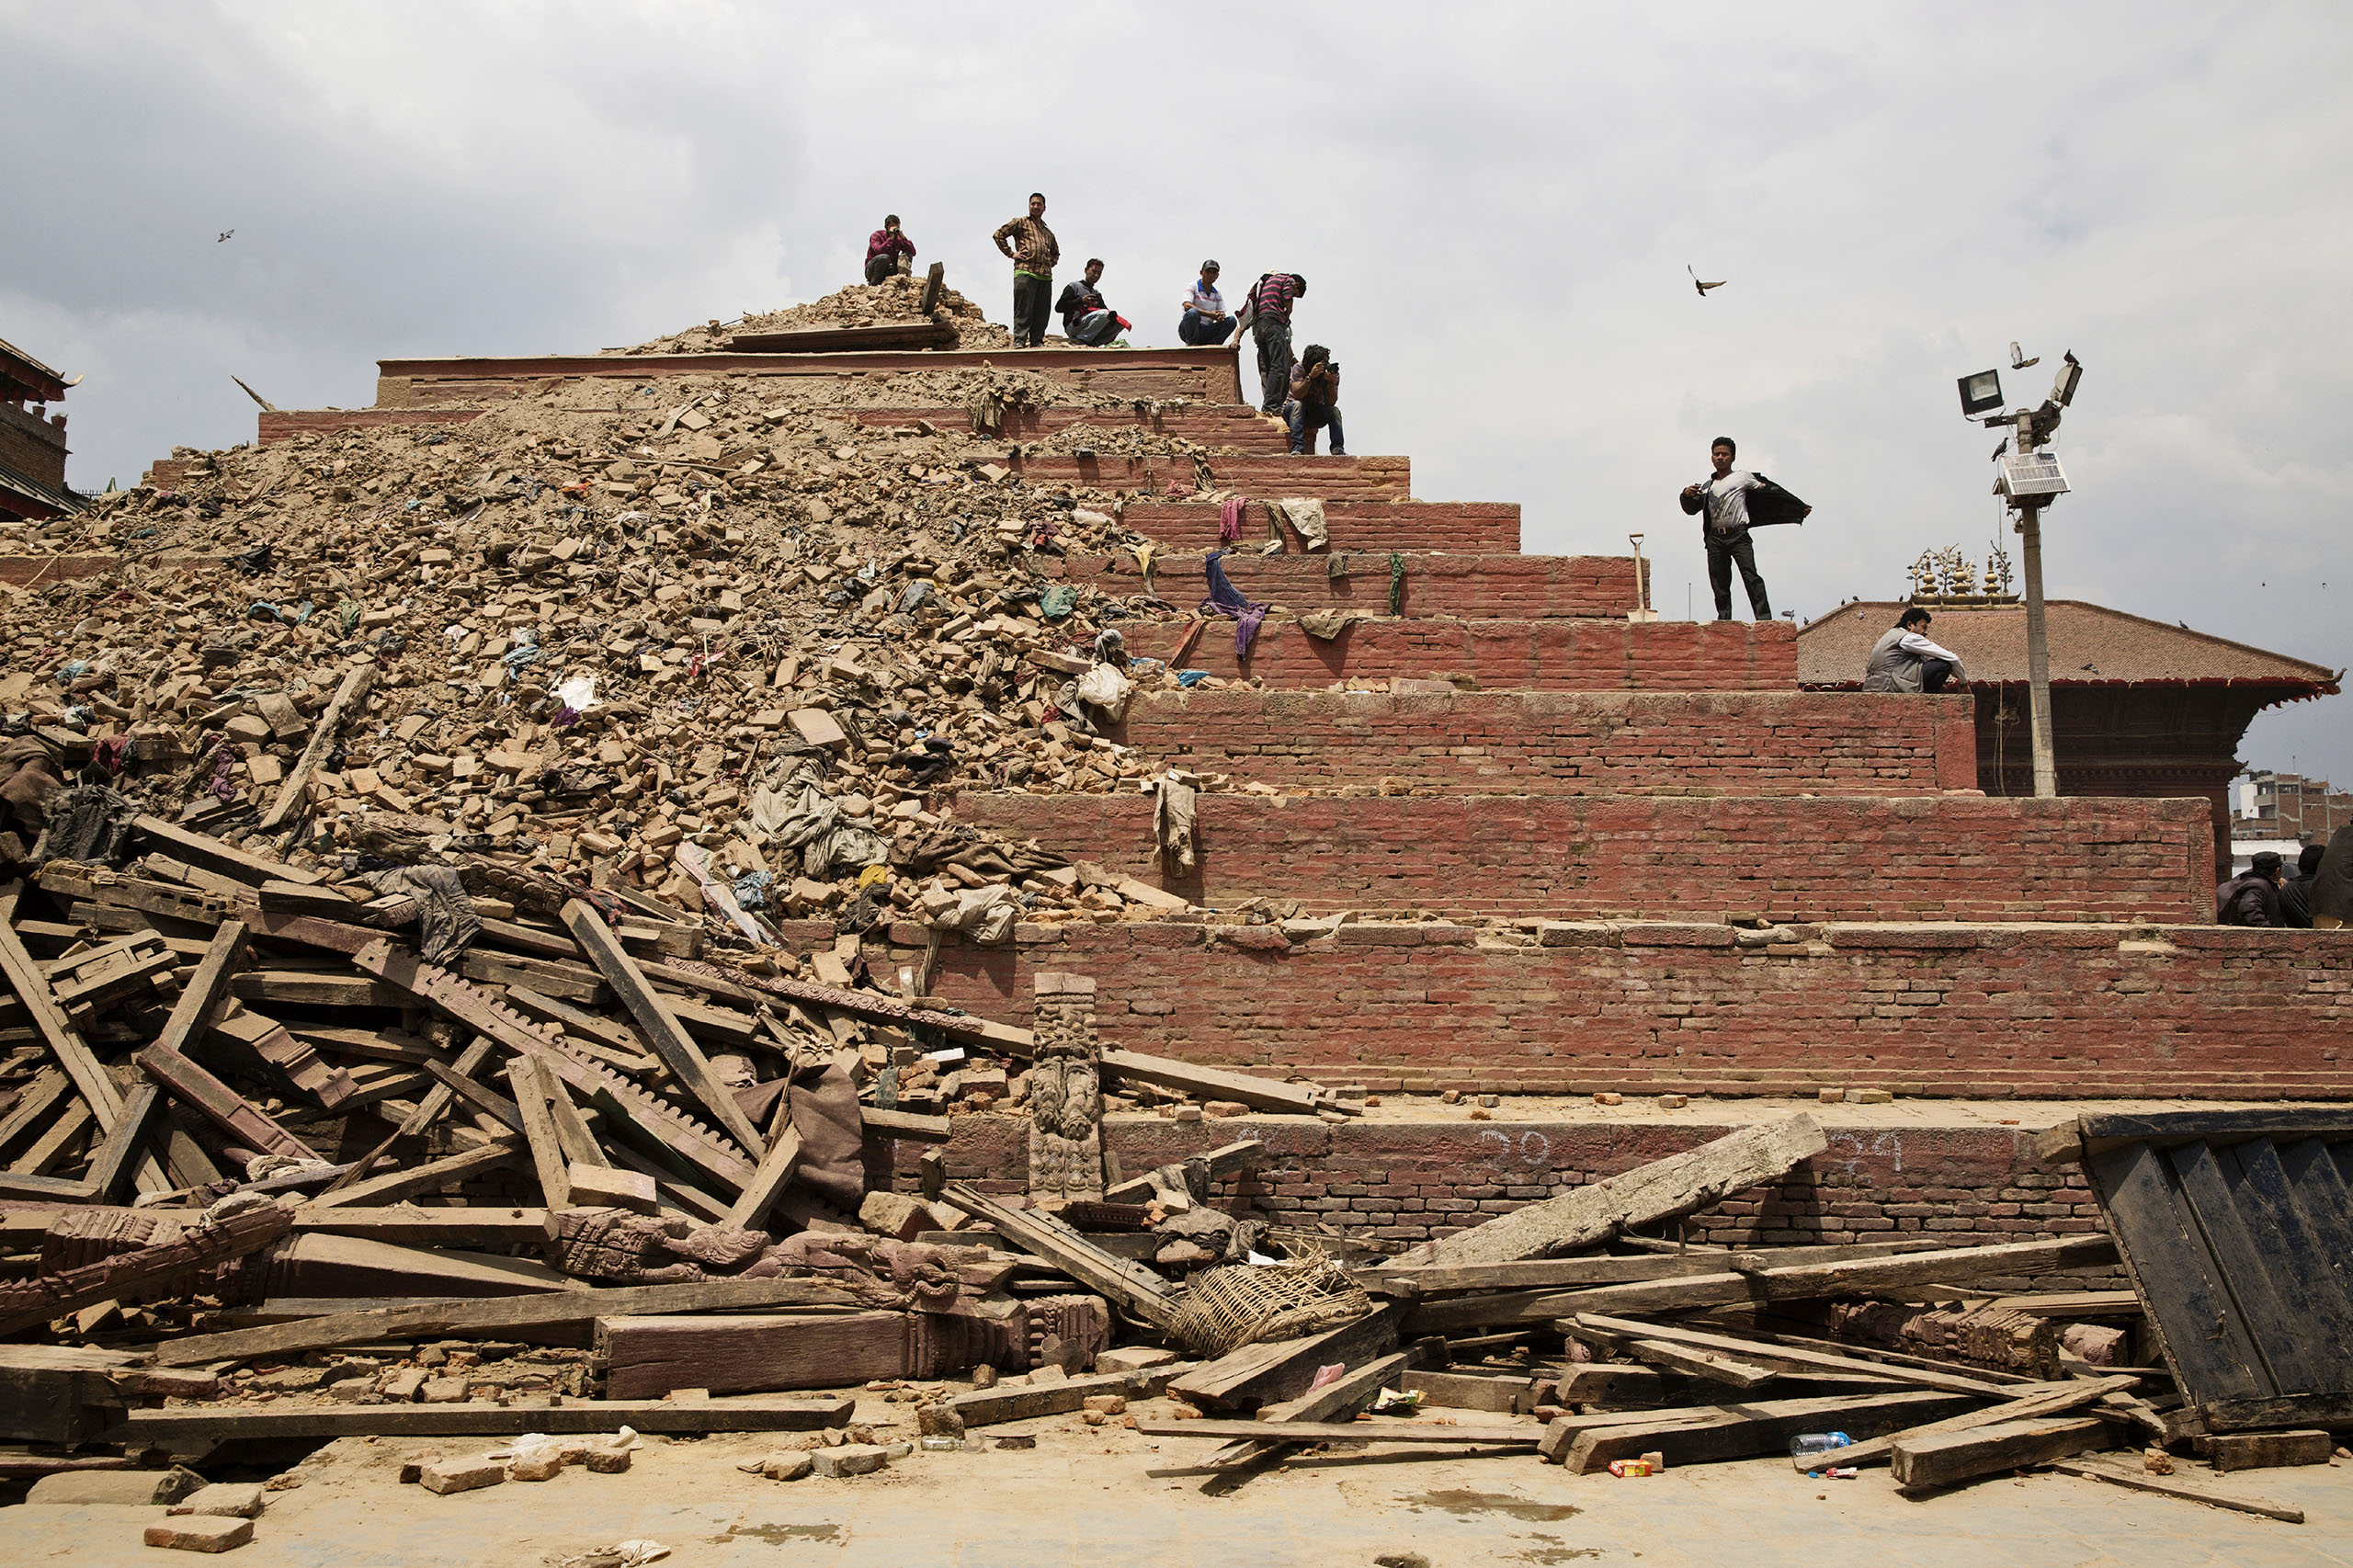 Durbar Square, a UNESCO World Heritage site in Kathmandu’s Old City, was severely damaged by the quake. (Adam Ferguson for TIME)